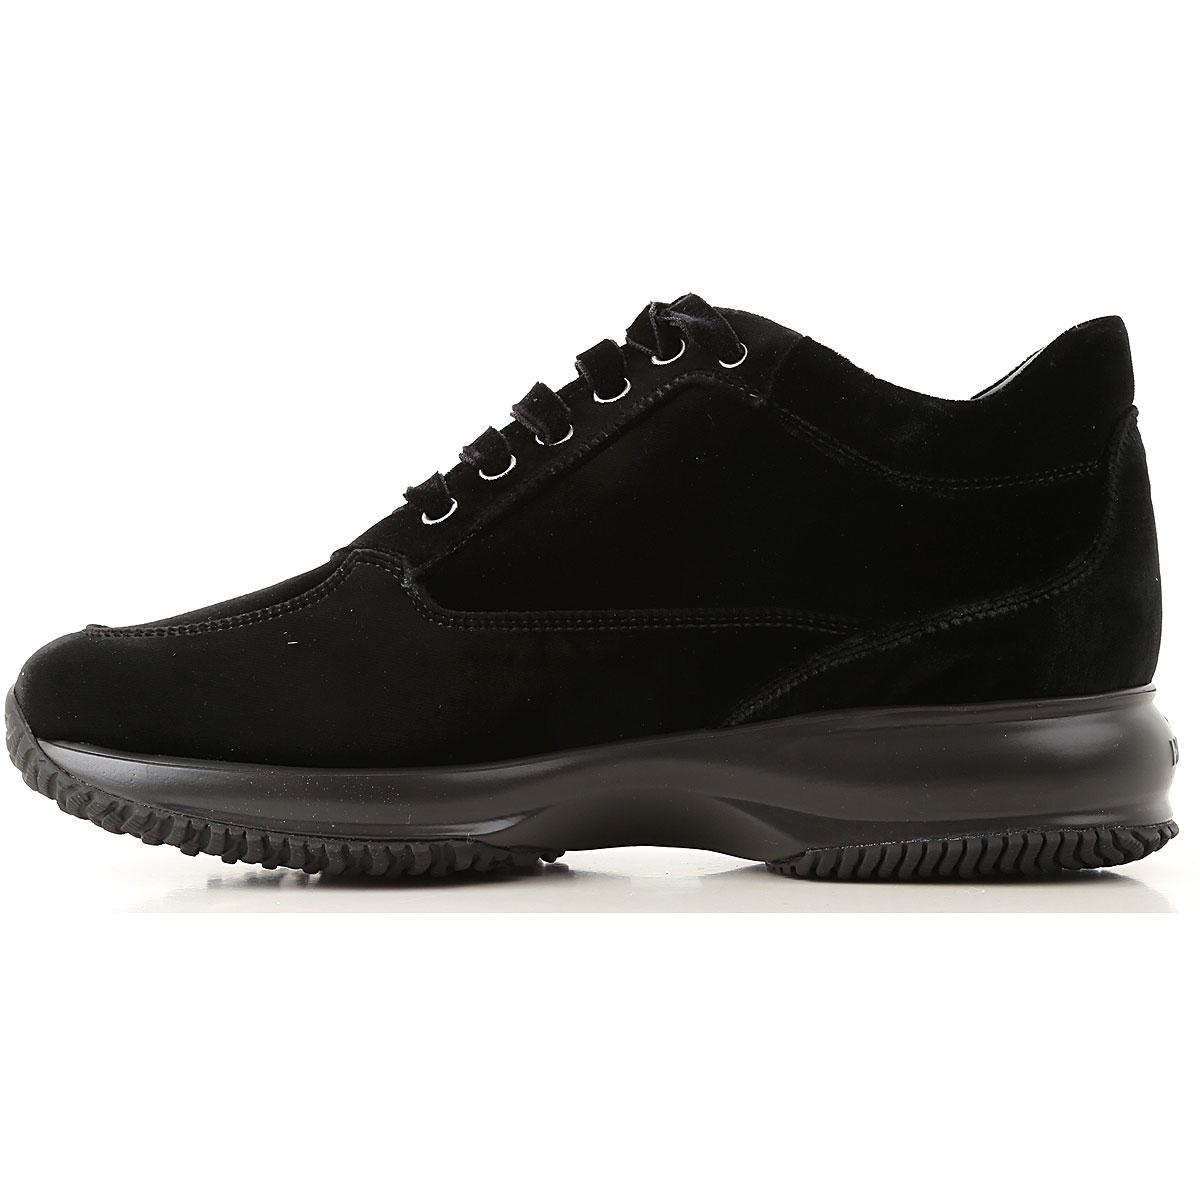 Hogan Leather Sneakers For Women On Sale In Outlet in Black - Lyst